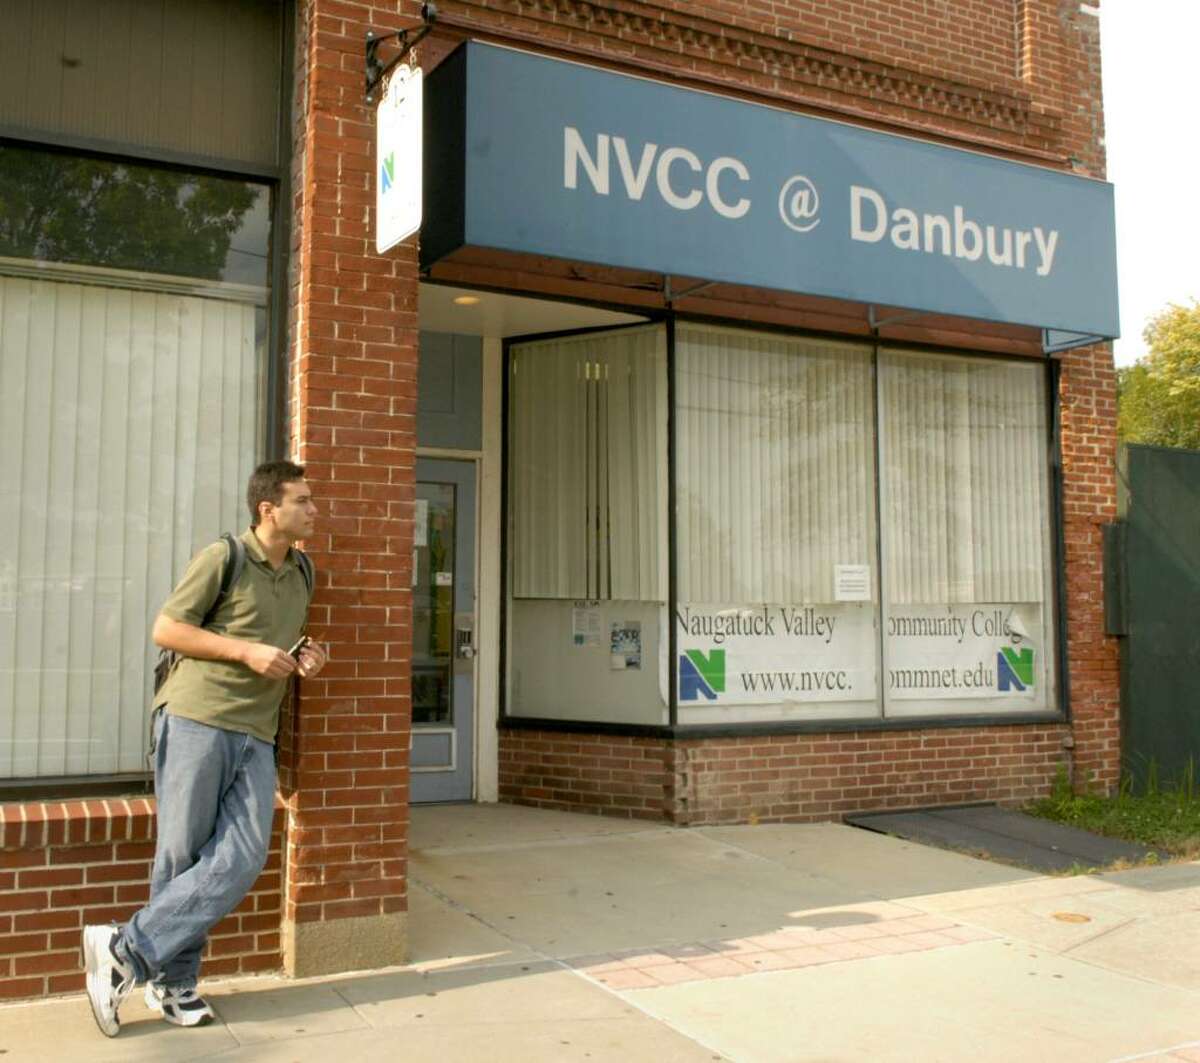 Rafael Hamoy, 23, of New Milford, a first year student, stands outside of the office on Crosby St. in Danbury for Naugatuck Community College, Monday, Sept 28, 2009